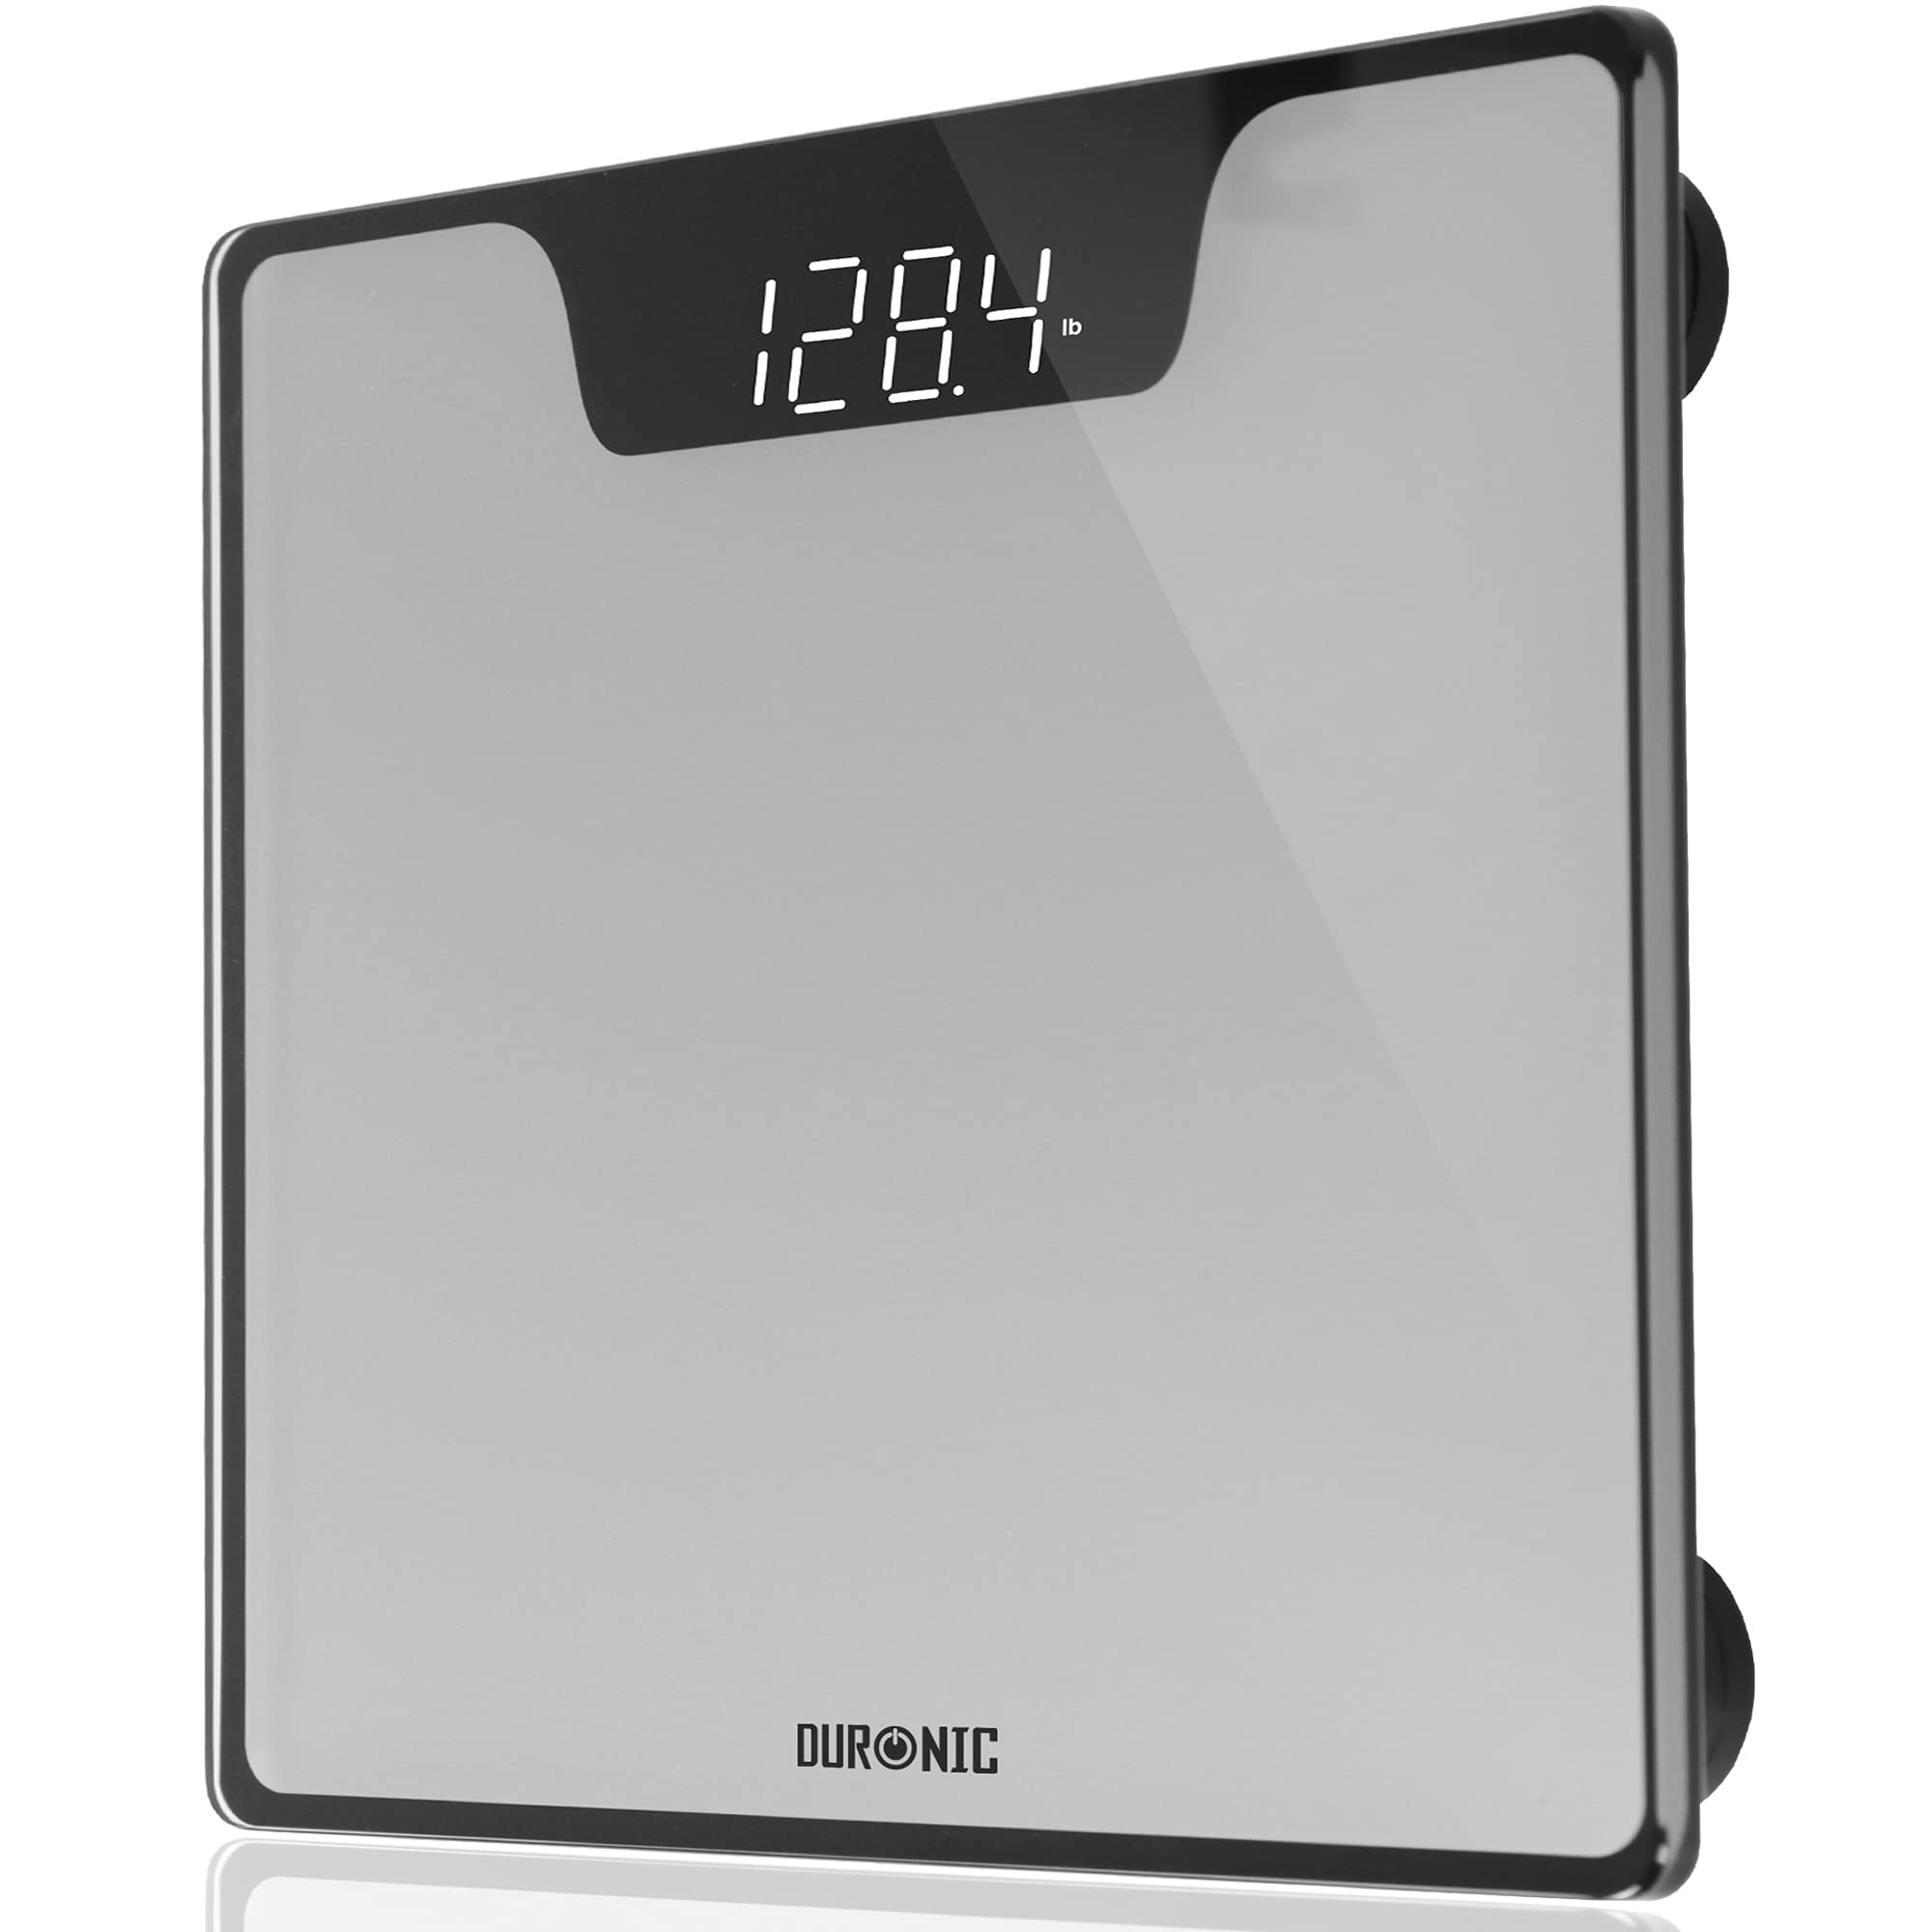 Duronic Digital Bathroom Body Scales BS303 | Measures Body Weight in Kilograms and Pounds | Silver/Black Design | Step-On Activation | Precision Sensors | 180kg Capacity